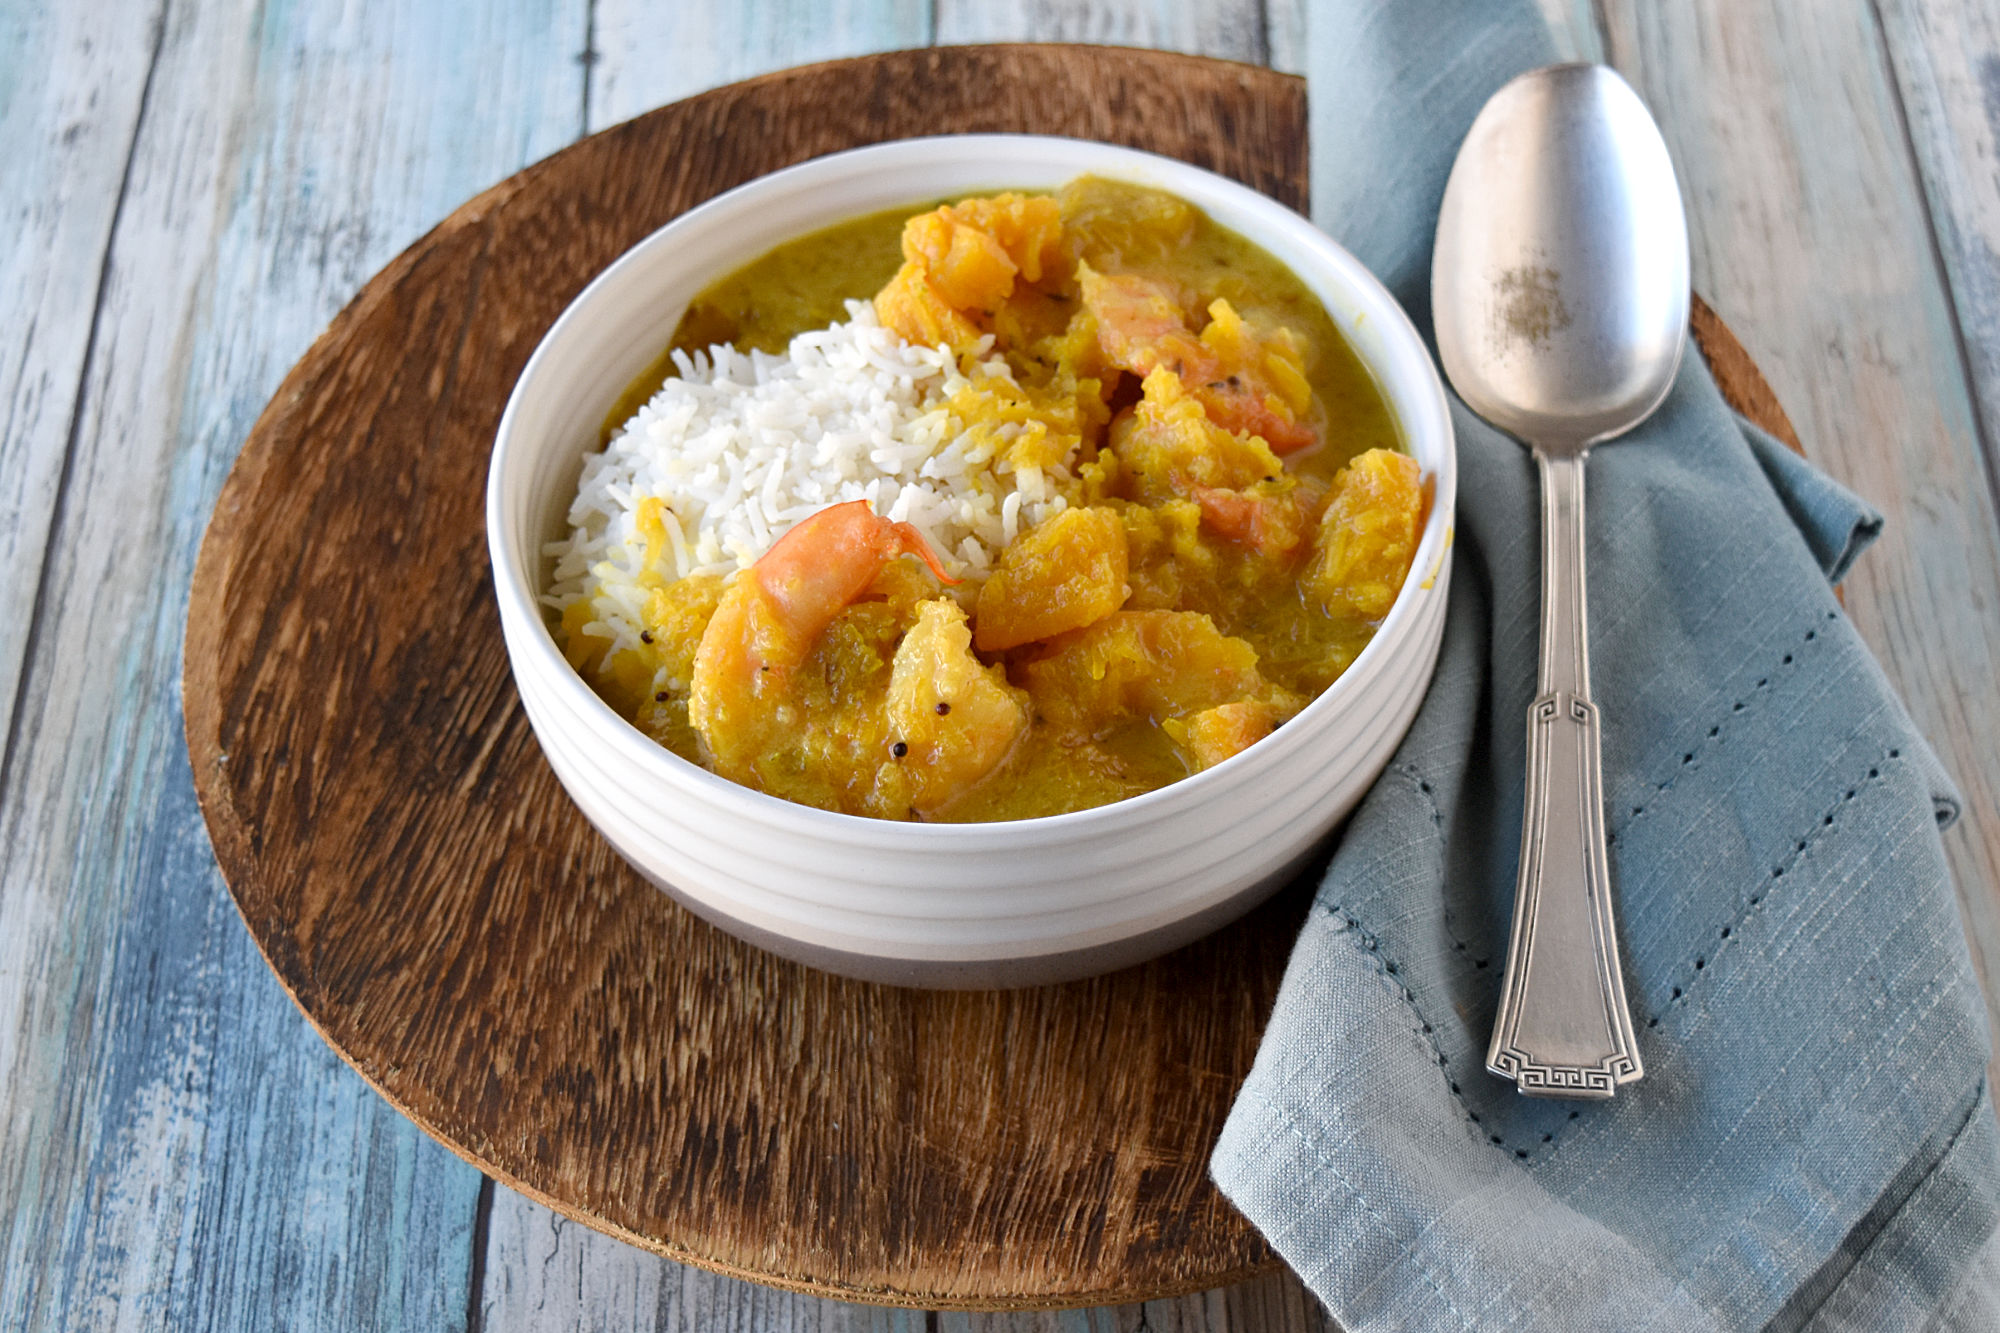 Coconut Pumpkin Shrimp Curry is packed with delicious curry flavors, sweet pumpkin, tasty shrimp, and a kick from the homemade chili base.  It is creamy with yummy kick. #PumpkinWeek